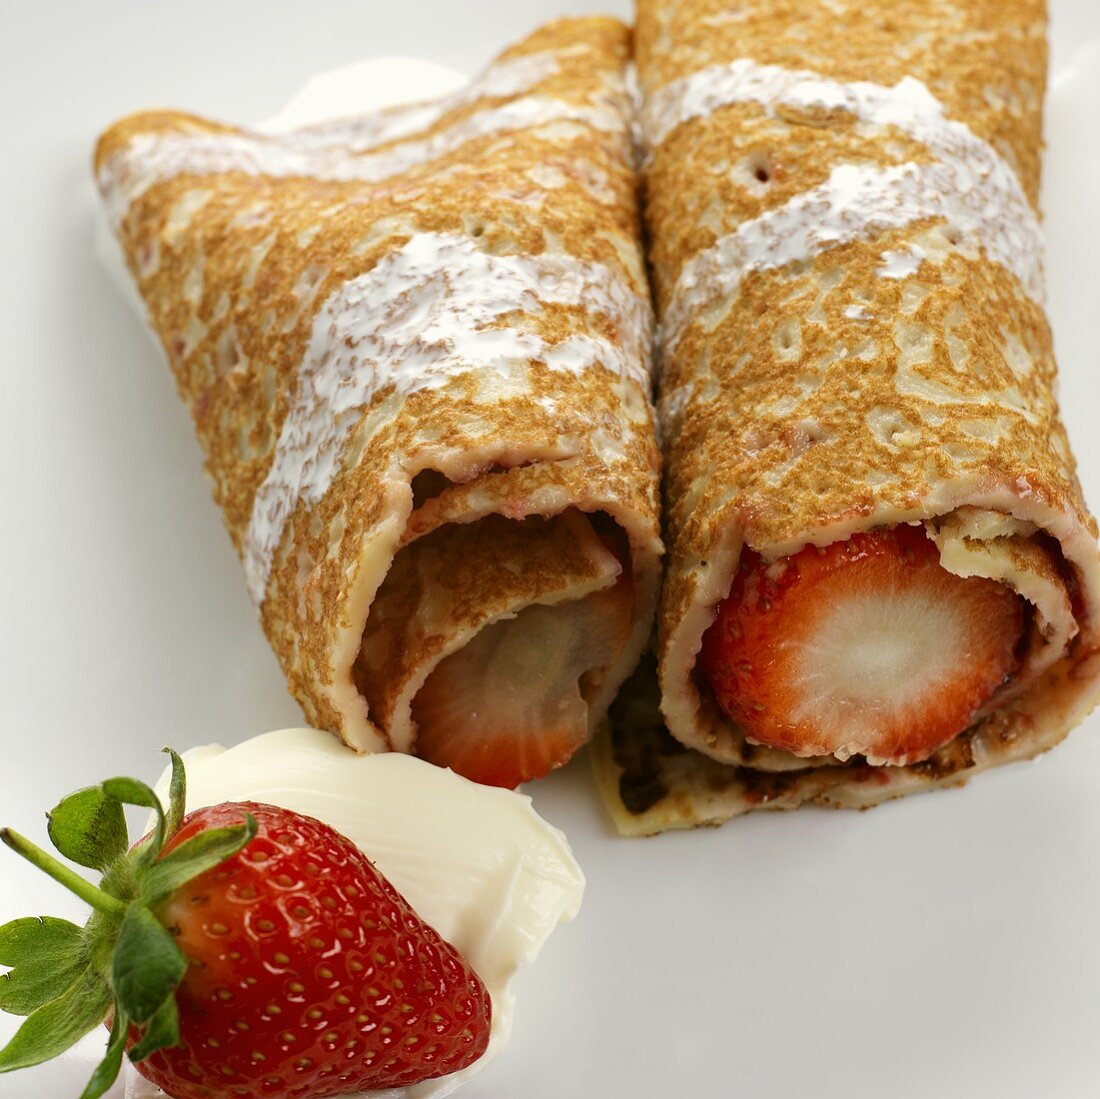 Pancakes filled with fresh strawberries and cream